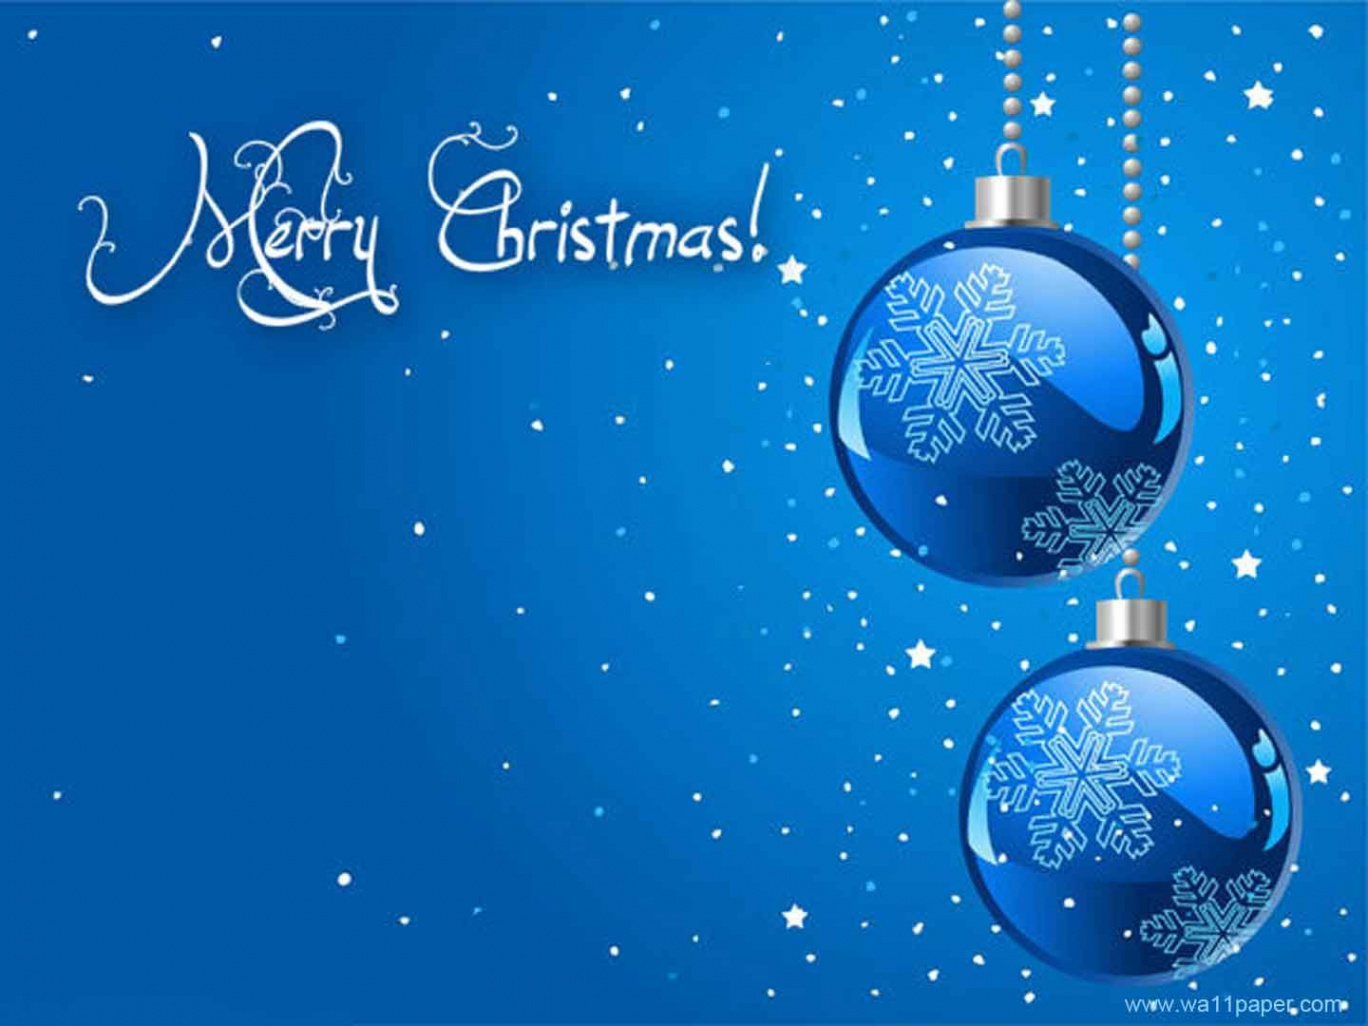 Merry Christmas Wallpapers Wallpaper  Christmas images wallpaper